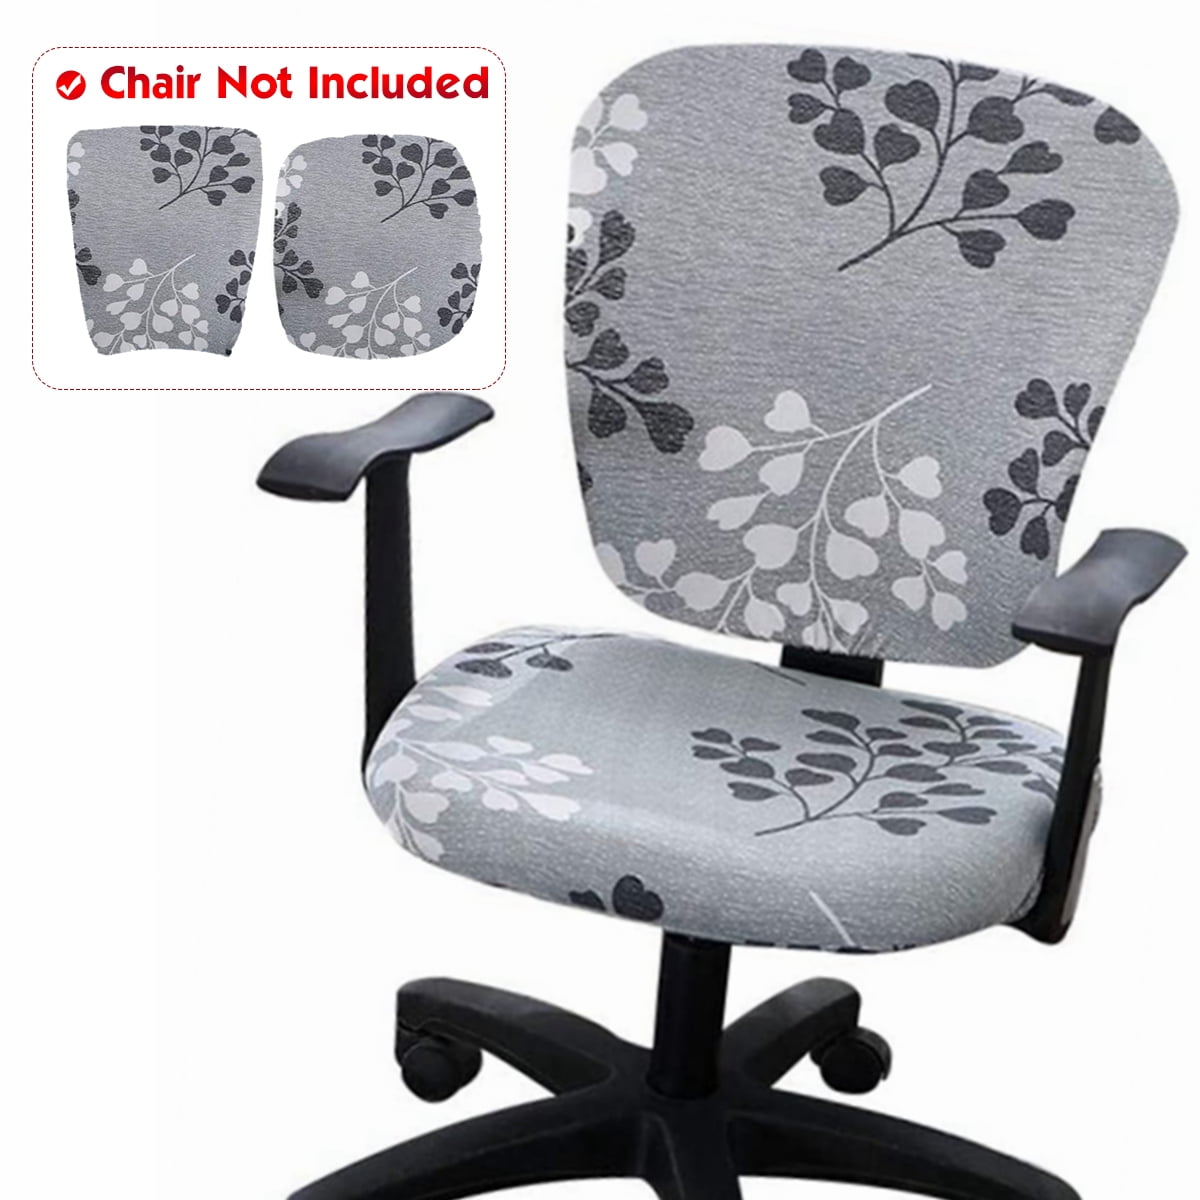 New Chair Cover Office Study Room Seat Armchair Swivel Chair Slipcover Stretchy 